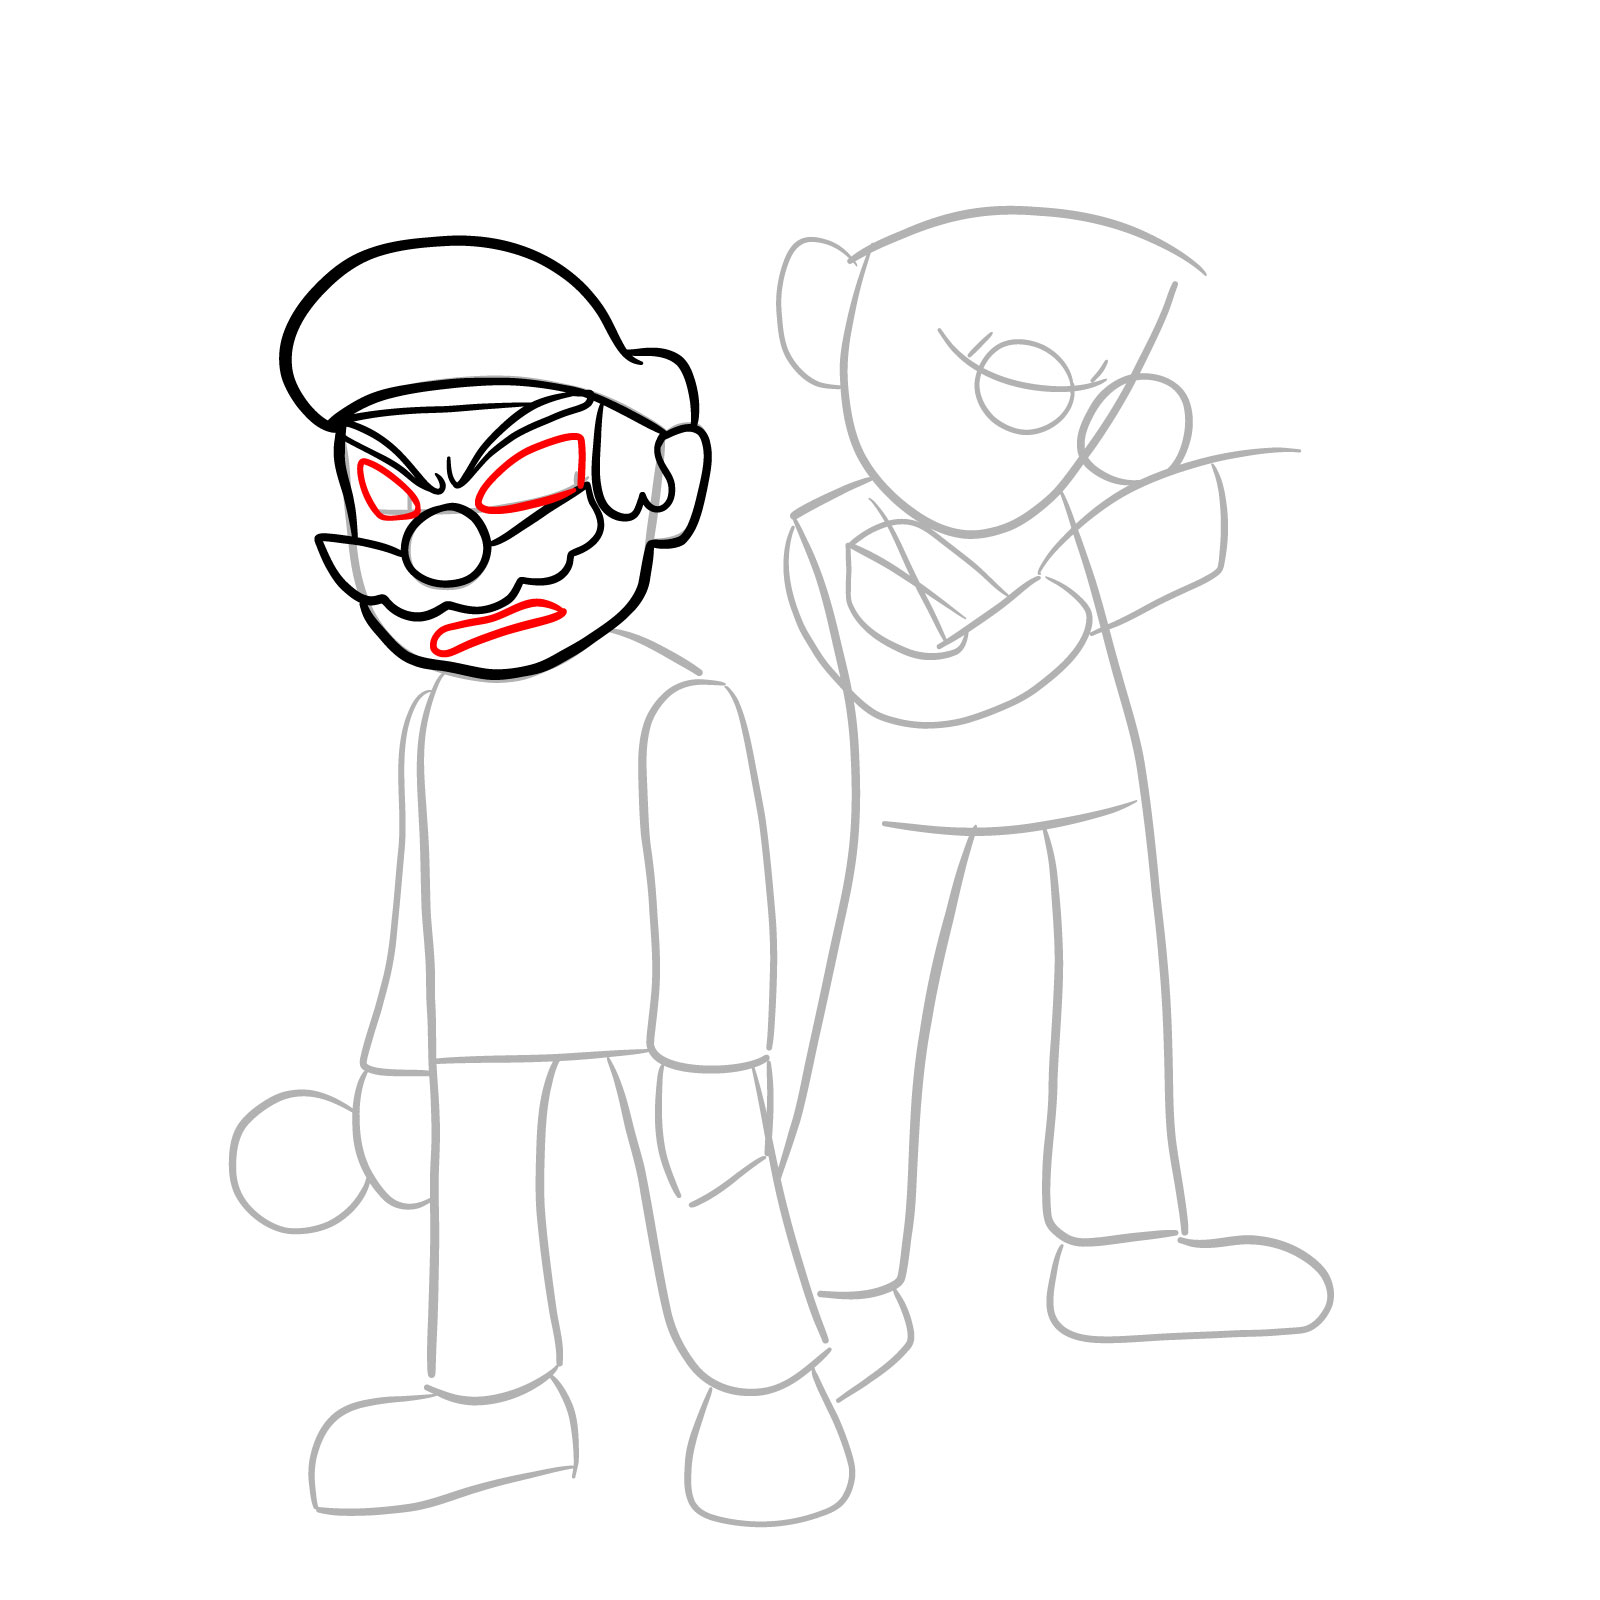 How to draw Mario and Luigi from Tails Gets Trolled - step 10